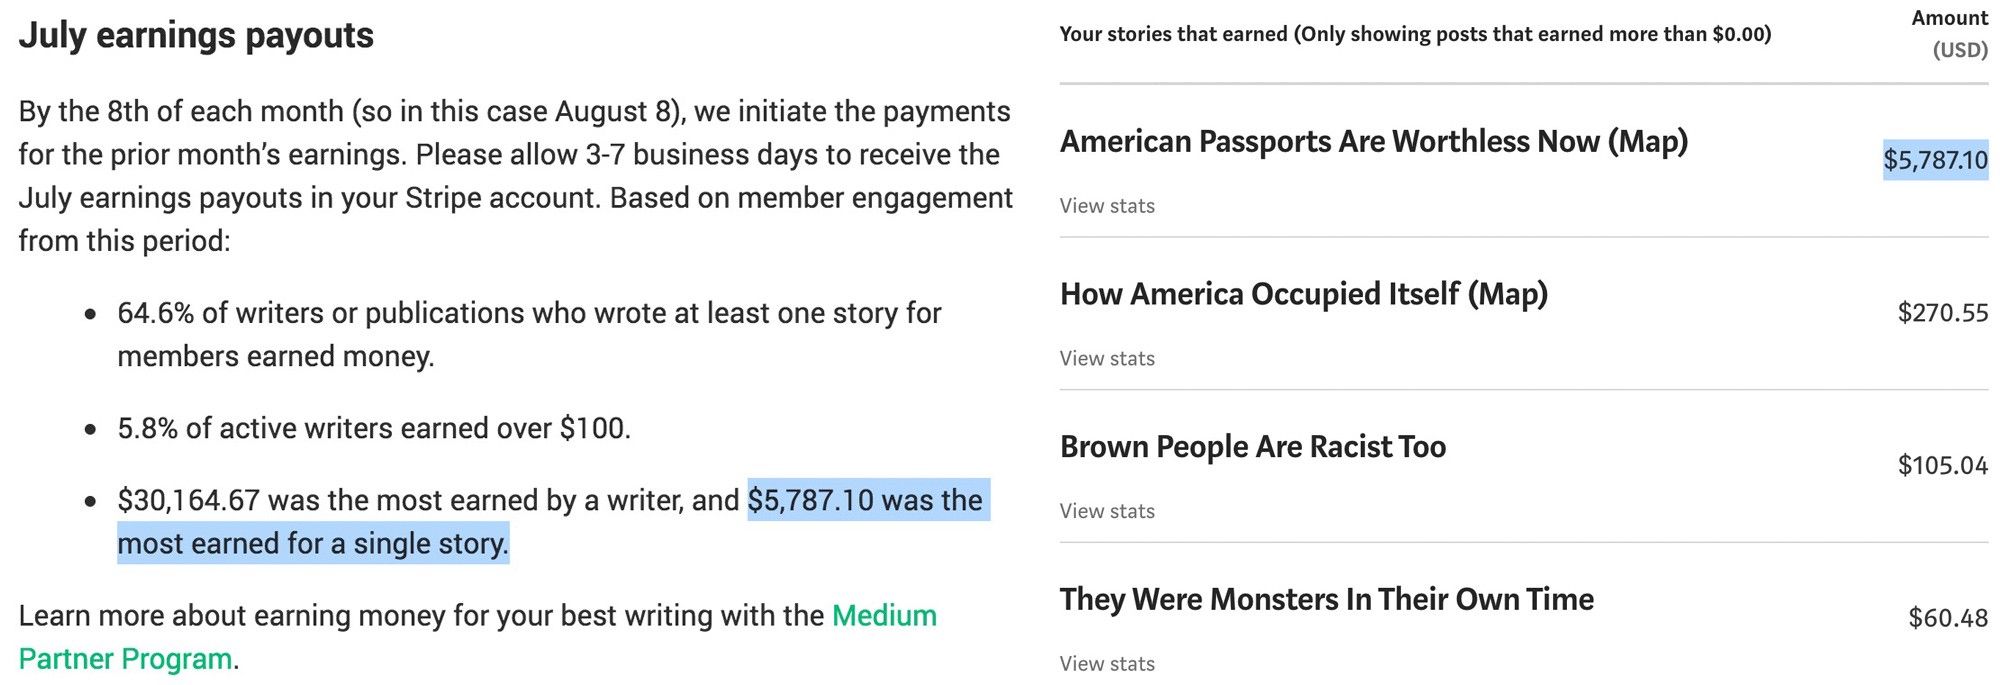 How I Wrote The Highest Earning Post On Medium